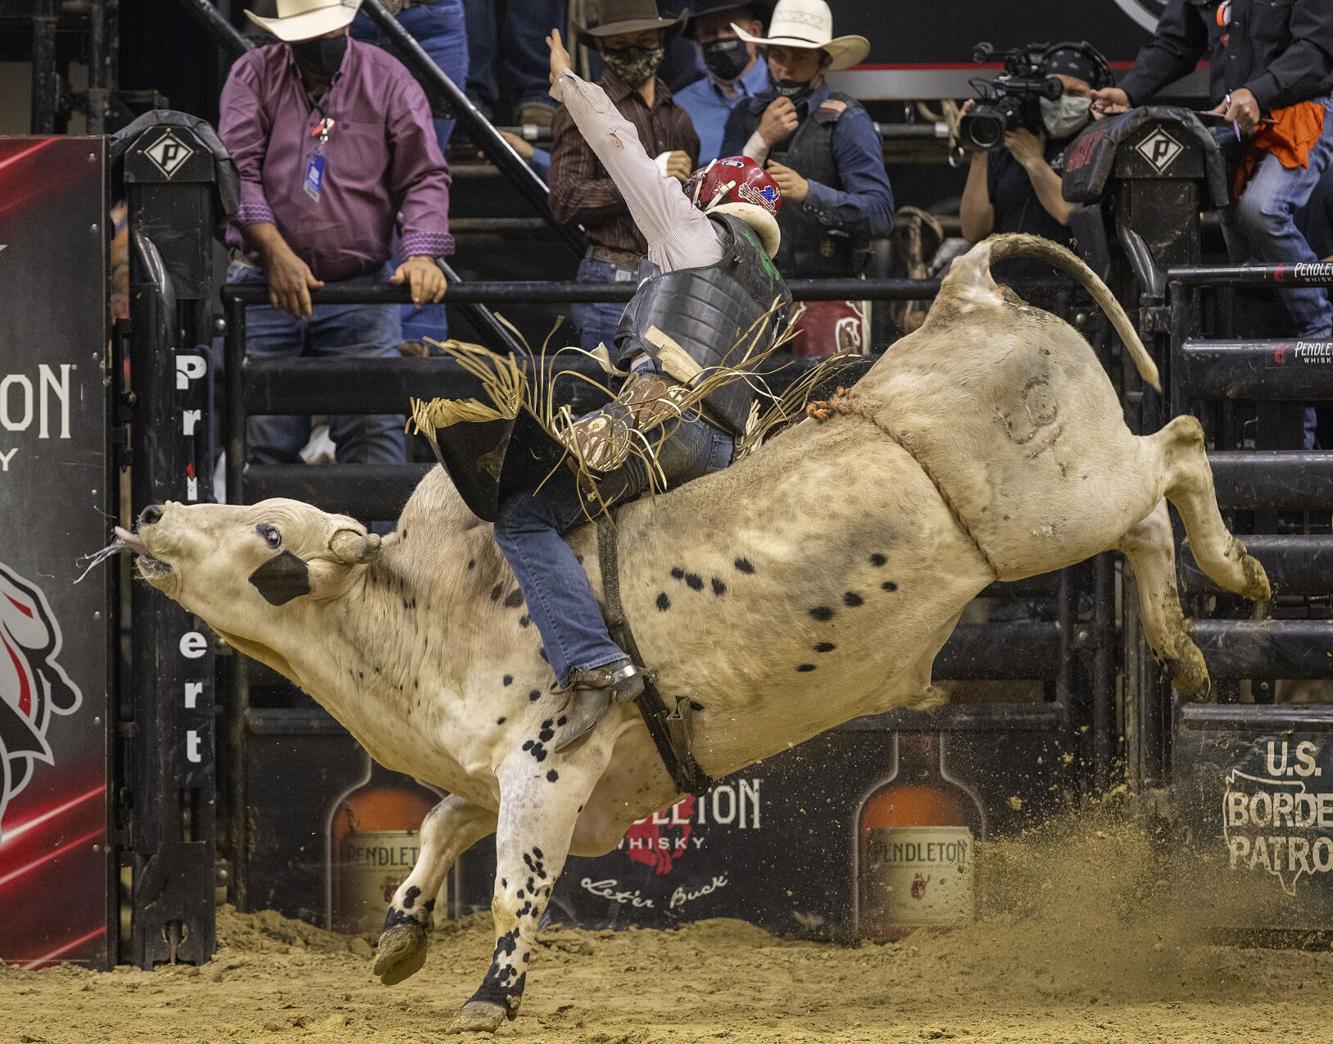 Gallery PBA Aggieland Classic bull riding at Reed Arena Rodeo